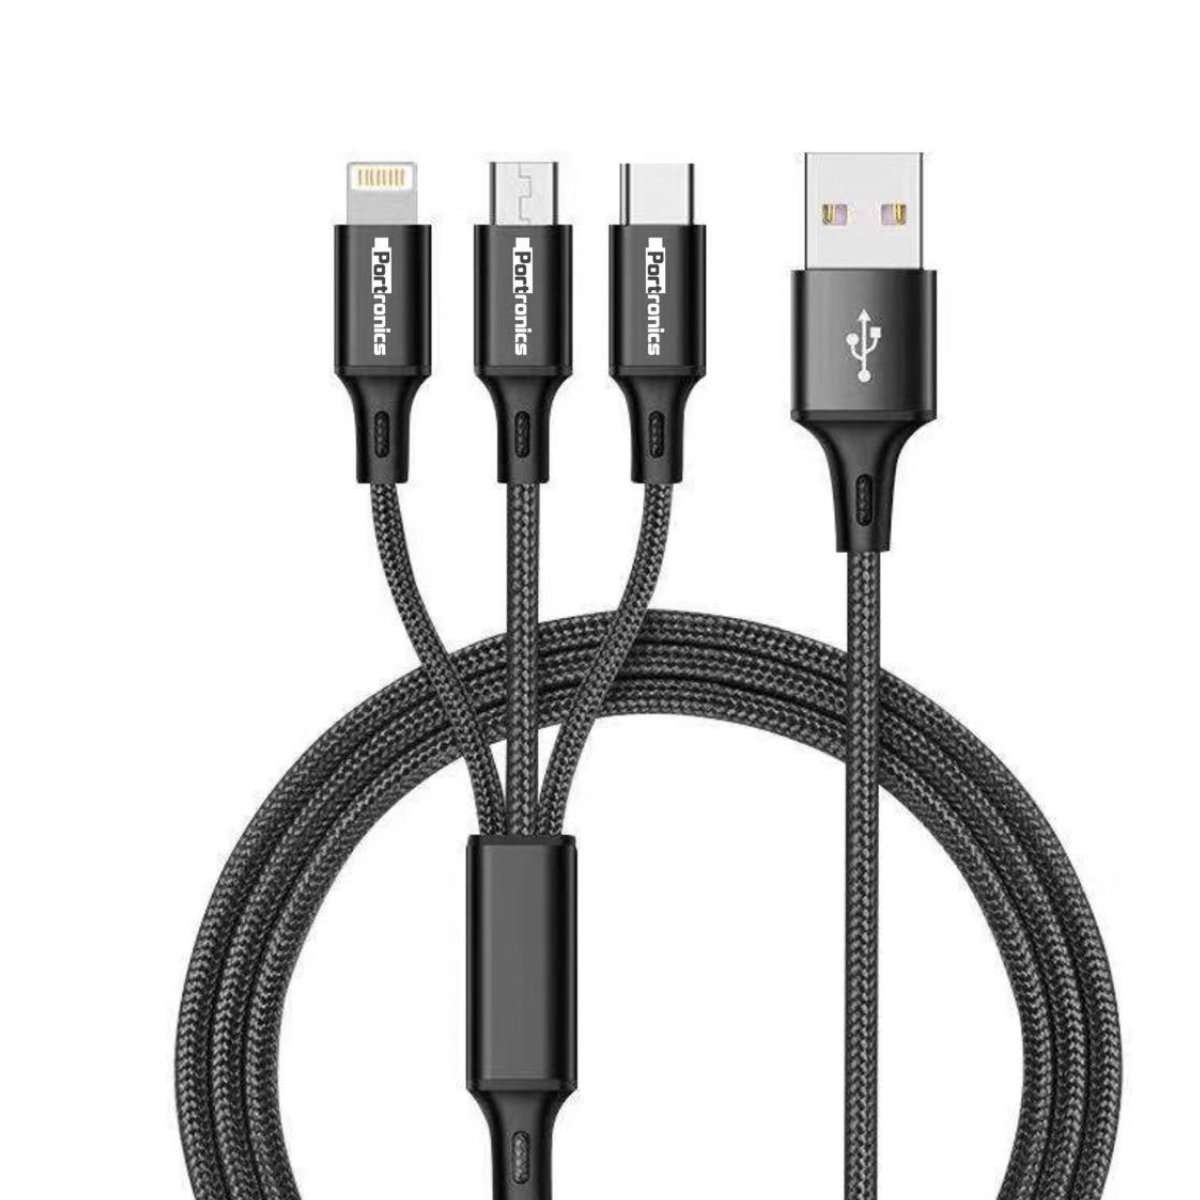 Portronics Konnect-Trio Plus 3-in-1 Multi-Functional Charging Cable for Android, iOS and Type C Devices (1.2m) (Black)